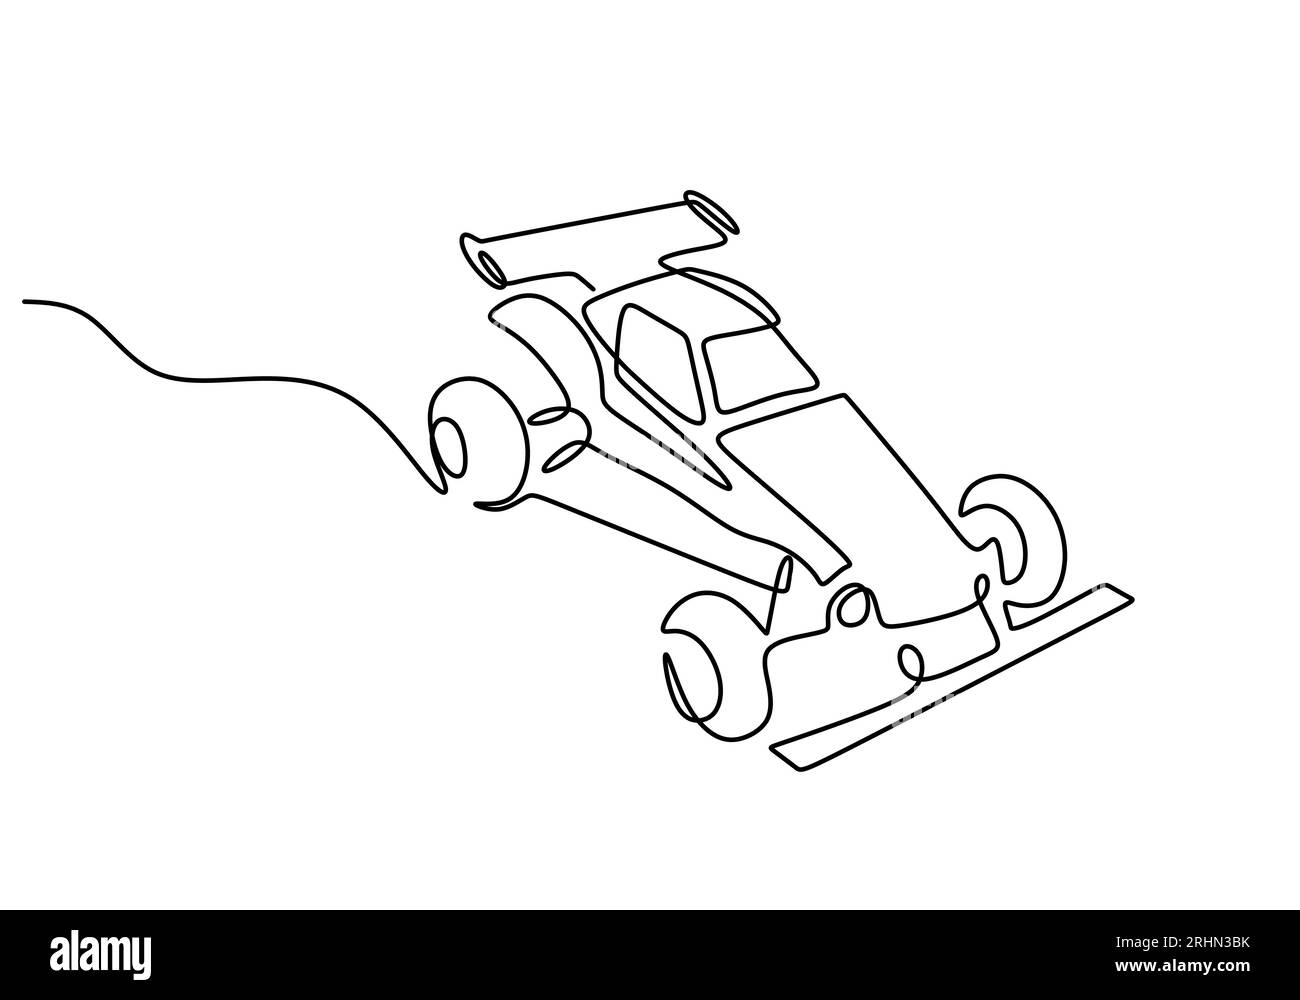 One continuous single line of tamiya car toy isolated on white background. Stock Vector